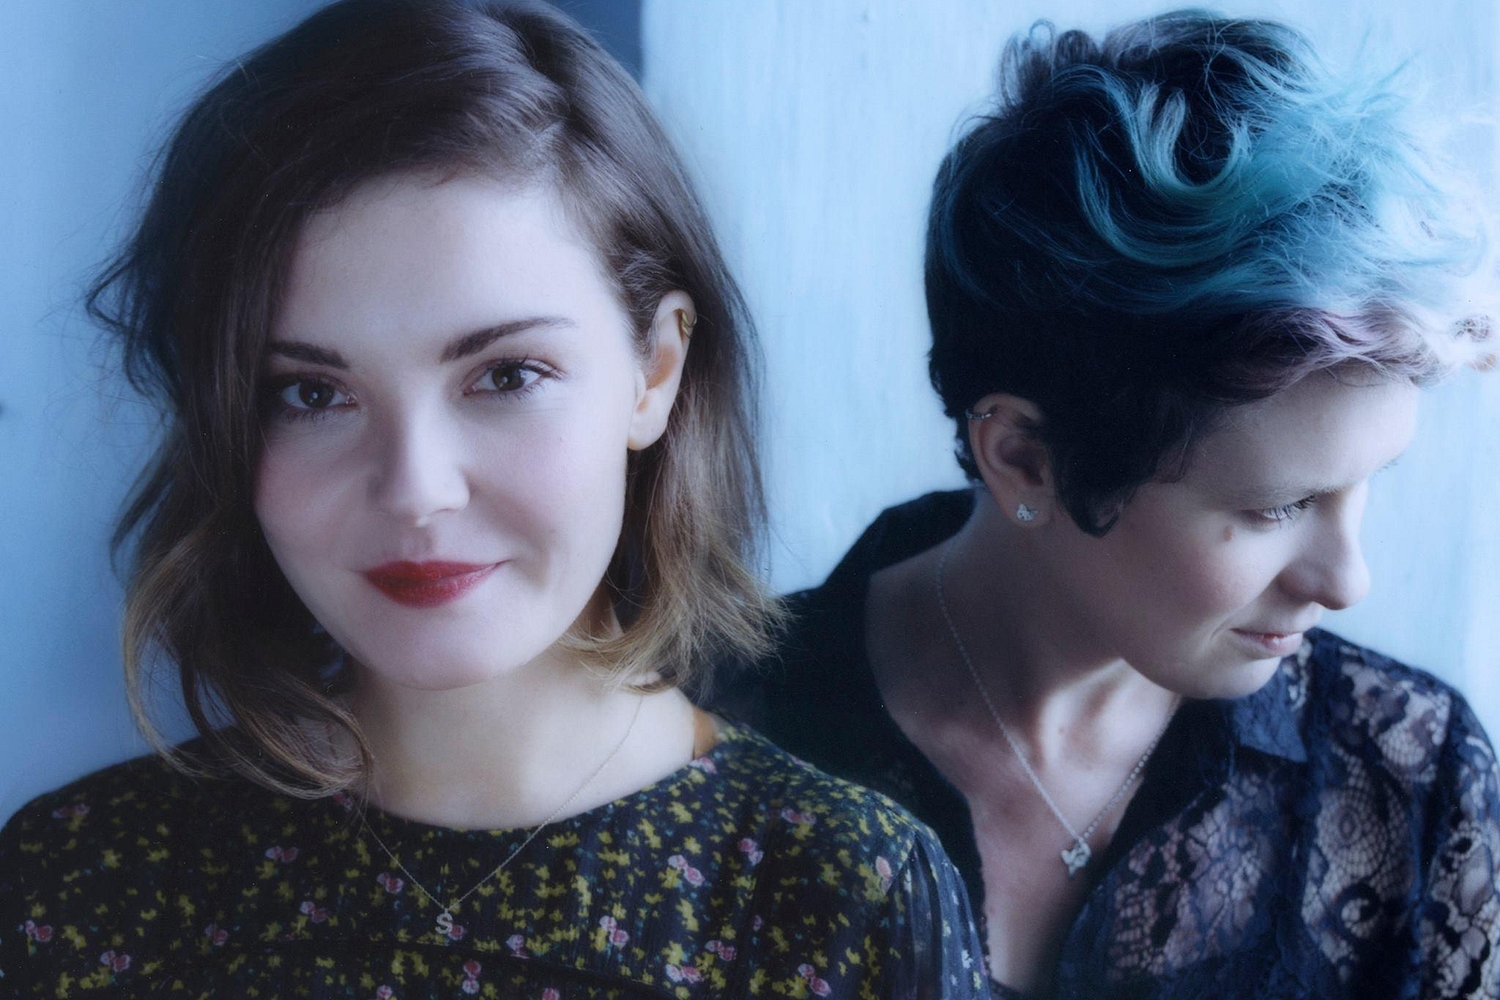 Honeyblood go for a wild ride in their ‘Babes Never Die’ video